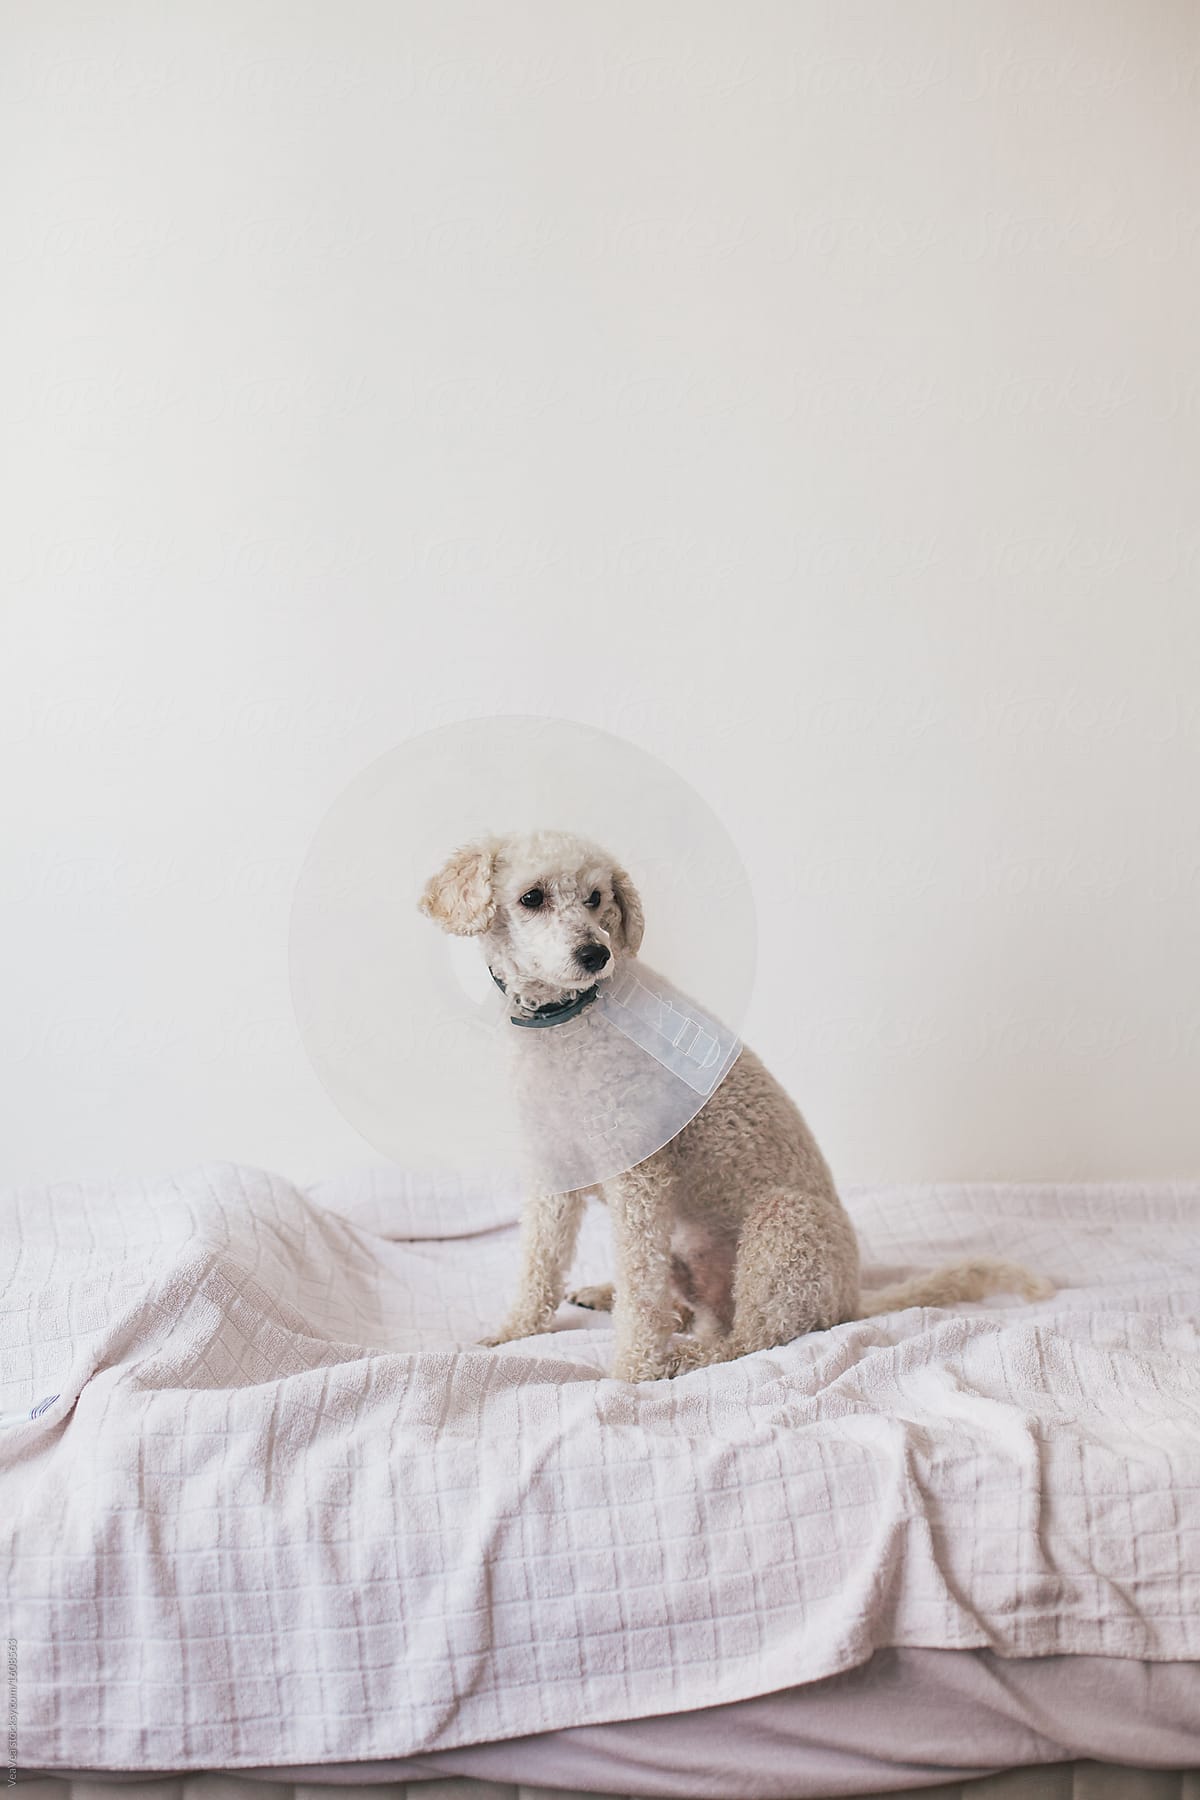 White poodle wearing dog cone sitting on a bed